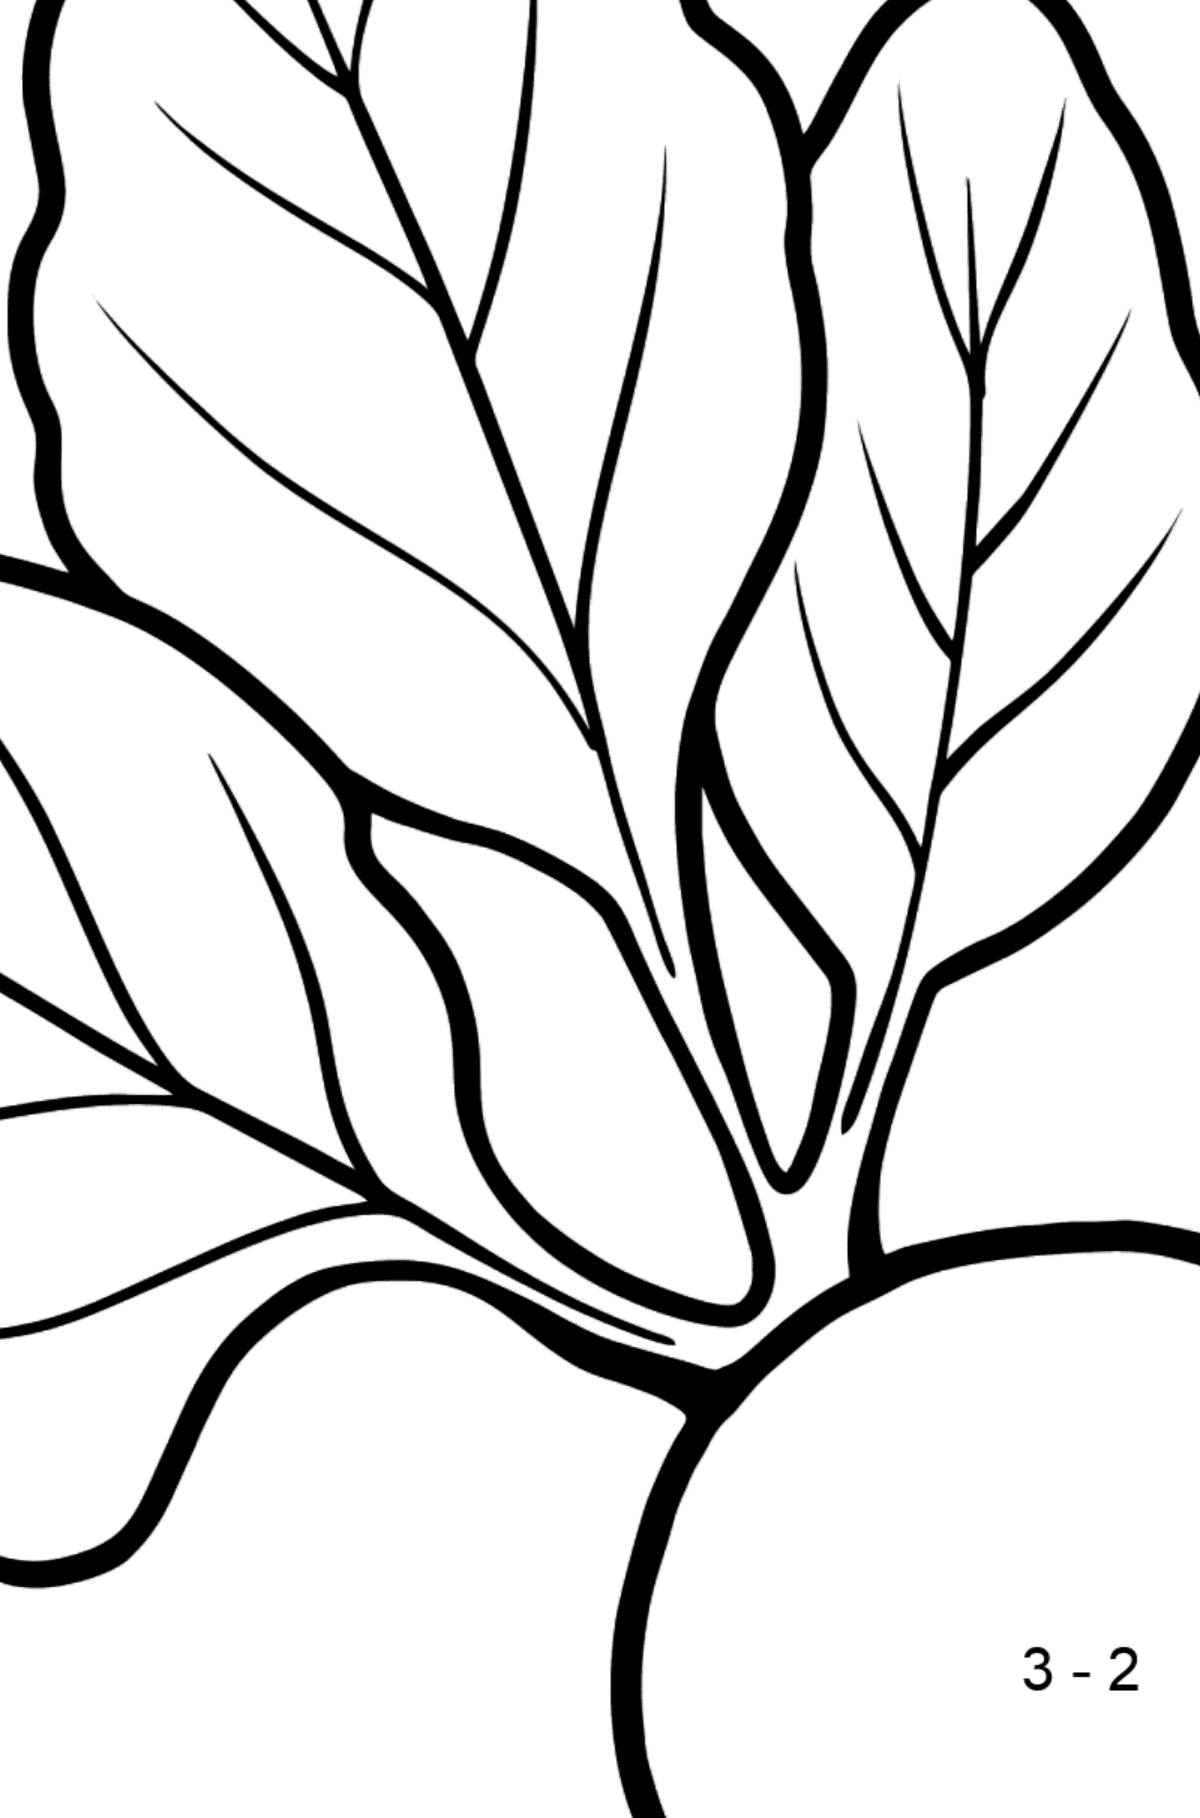 Beet coloring page - Math Coloring - Subtraction for Kids